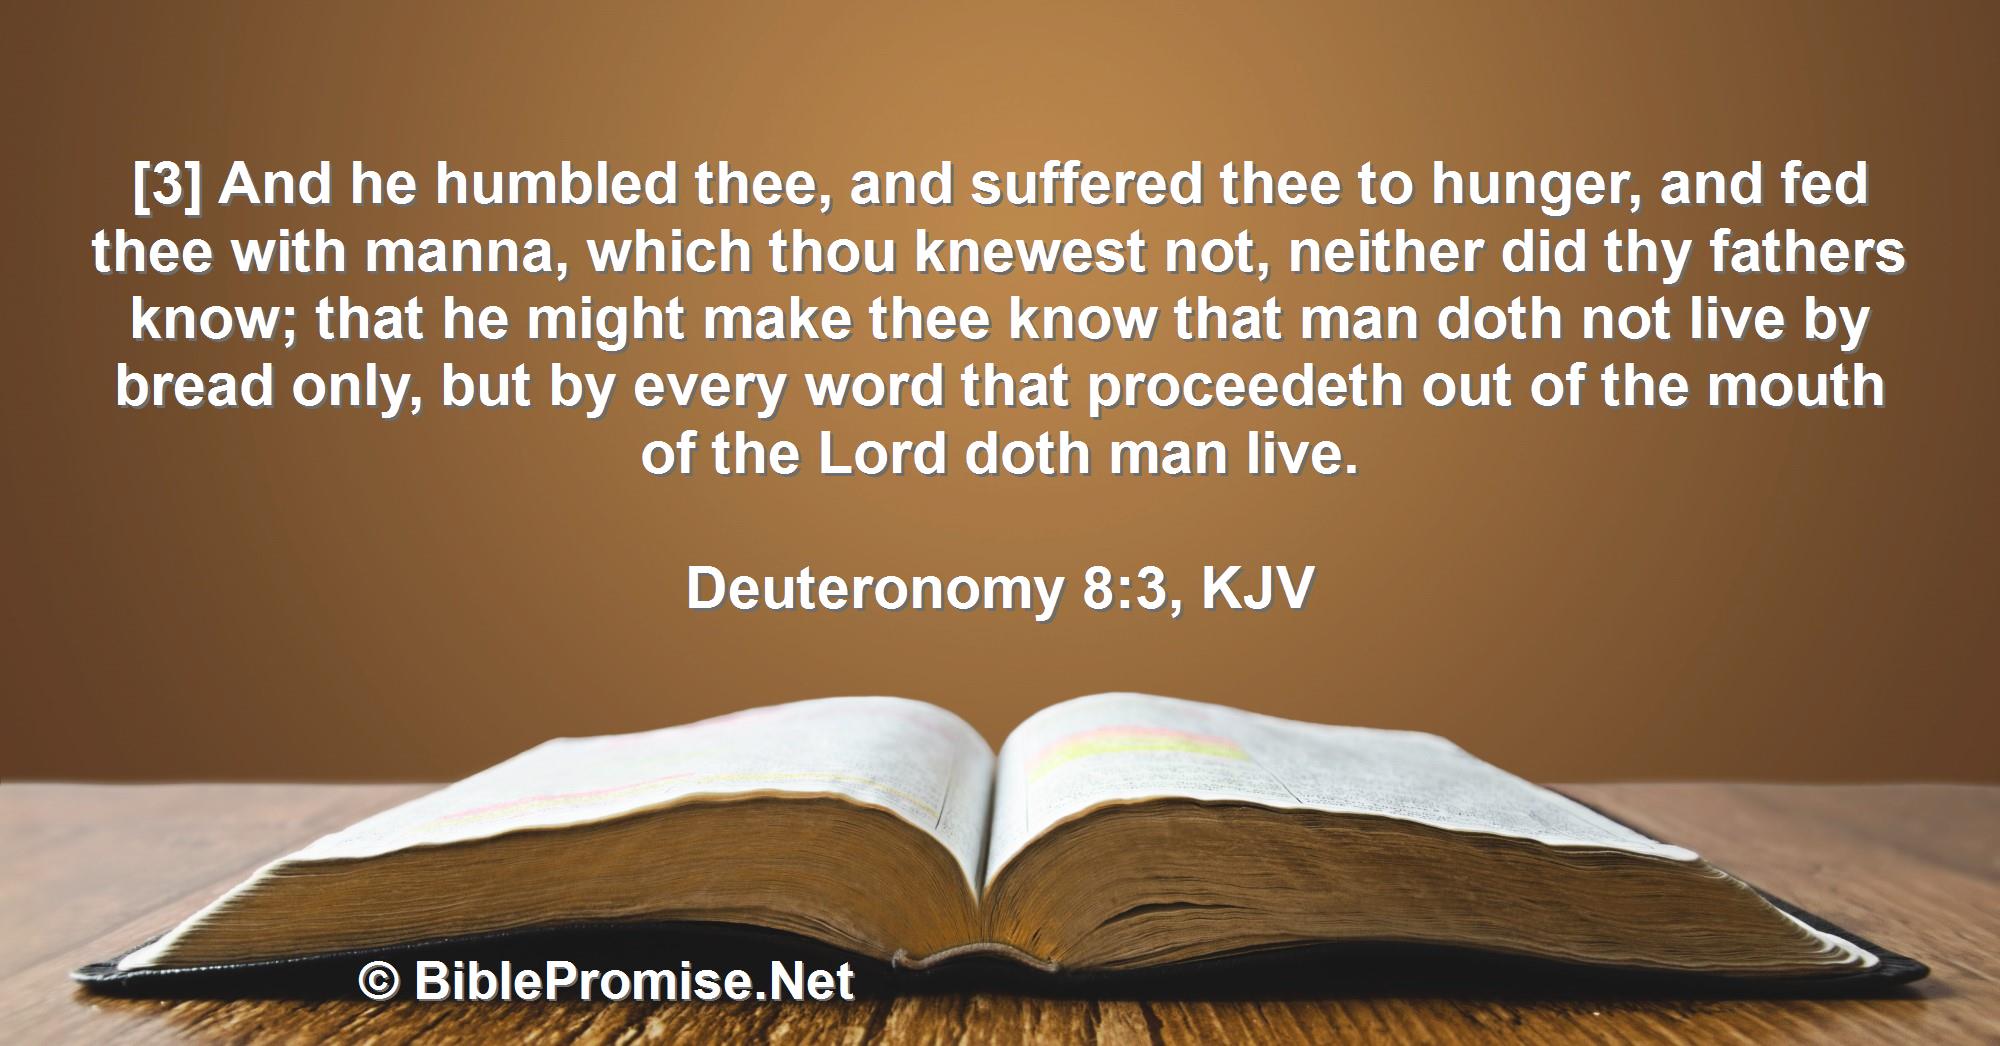 Friday, September 23, 2022 - Deuteronomy 8:3 (KJV) - Bible promise that man shall not live by bread alone; but man lives by every word that proceeds from the mouth of the Lord.